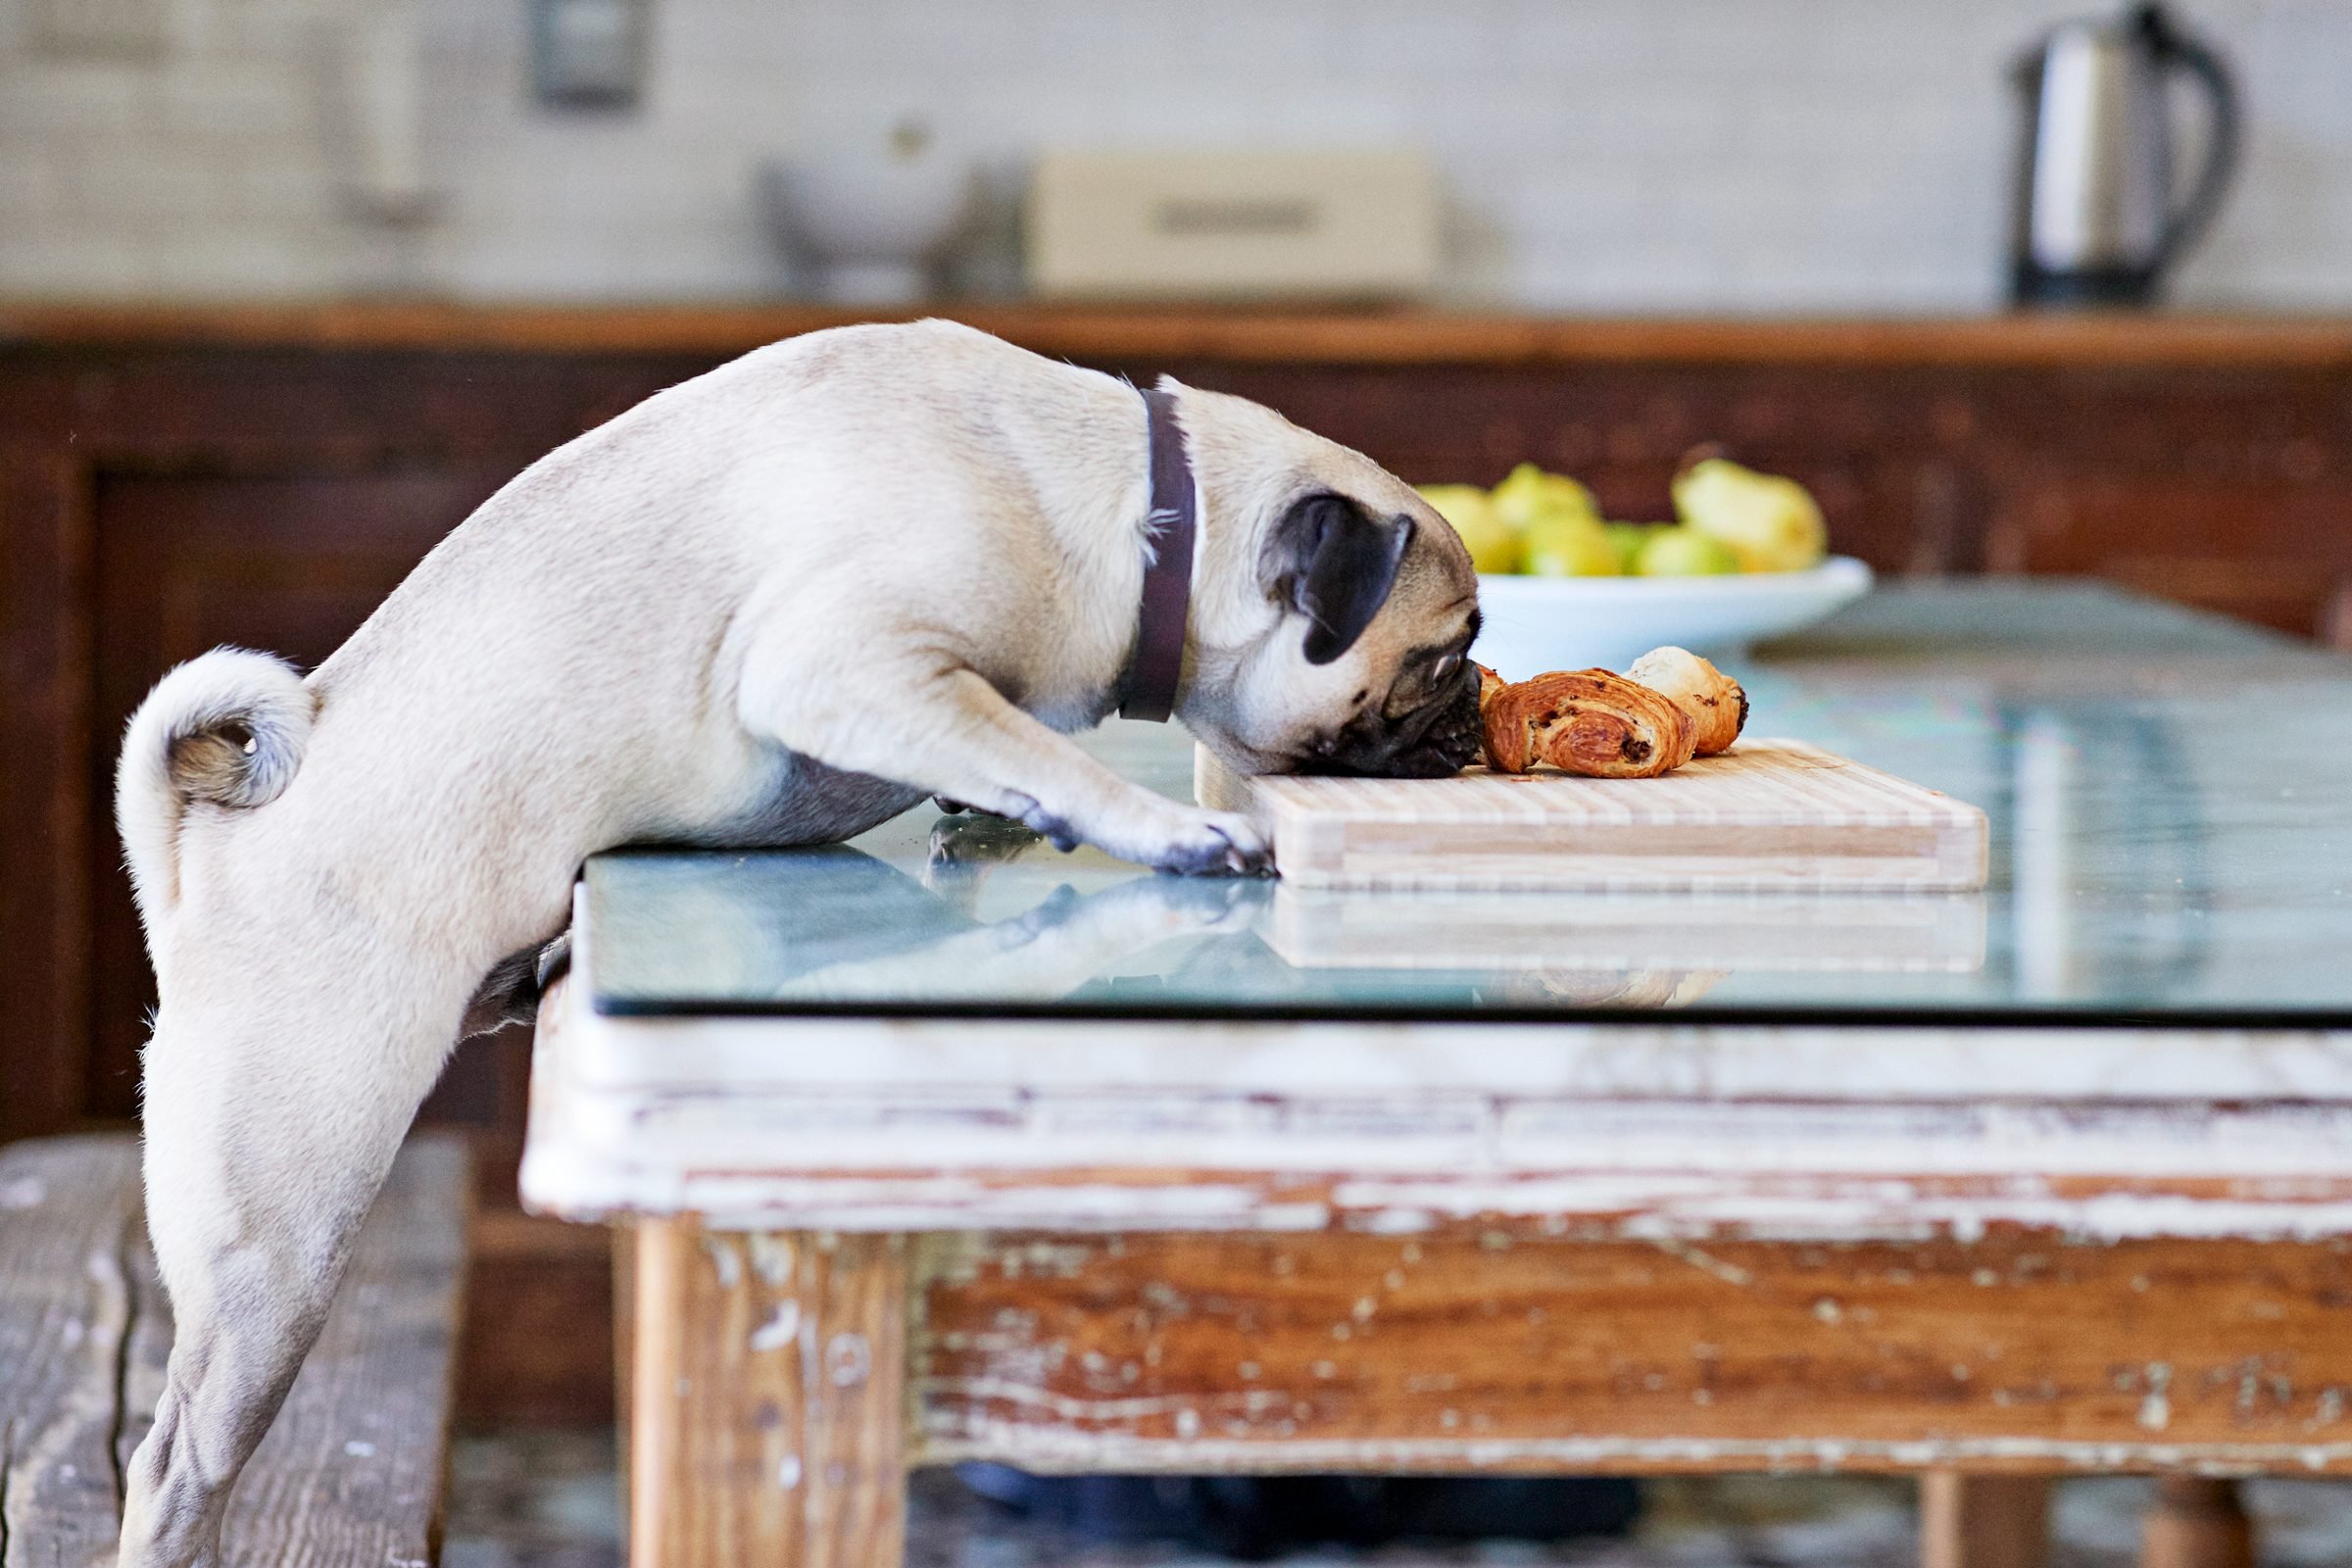 https://www.thehealthy.com/wp-content/uploads/2023/06/what-can-dogs-eat-GettyImages-1022889064-JVedit.jpg